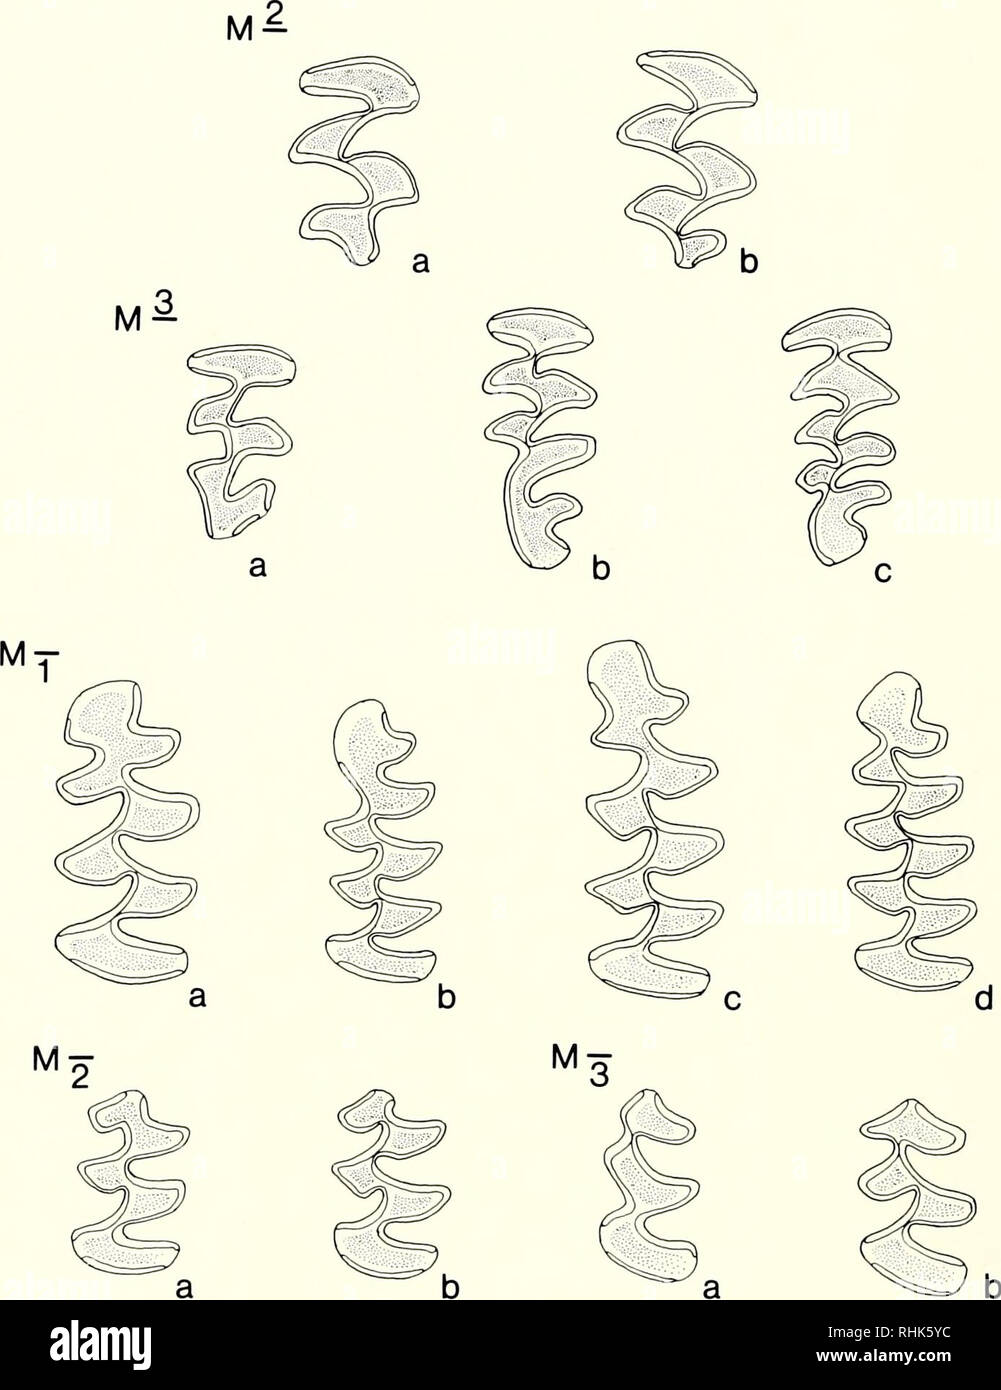 . Biology of New World Microtus. Rodents; Rodents; Microtus; Voles. 146 Carleton. Fig. 6. Occlusal view of principal molar variants in species of Microtus (see also Table 2). M- (=M2): a, M. (Pedomys) ochrogaster; b, M. {Microtus) pennsylvanicus. M^ (=M3): a, M. {Pedomys) ochrogaster; b, M. {Microtus) pennsylvanicus; c, M. {Microtus) chrotorrhinus. M, (=ml): a, M. {Orthriomys) umbrosus; b, M. {Microtus) oeconomus; c, M. {Microtus) pennsylvanicus; d, M. {Stenocranius) miurus. M2 (=m2): a, M. {Pedomys) ochrogaster; b, M. {Microtus) pennsylvanicus. M, (=m3): a, M. {Microtus) pennsylvanicus; b, M. Stock Photo